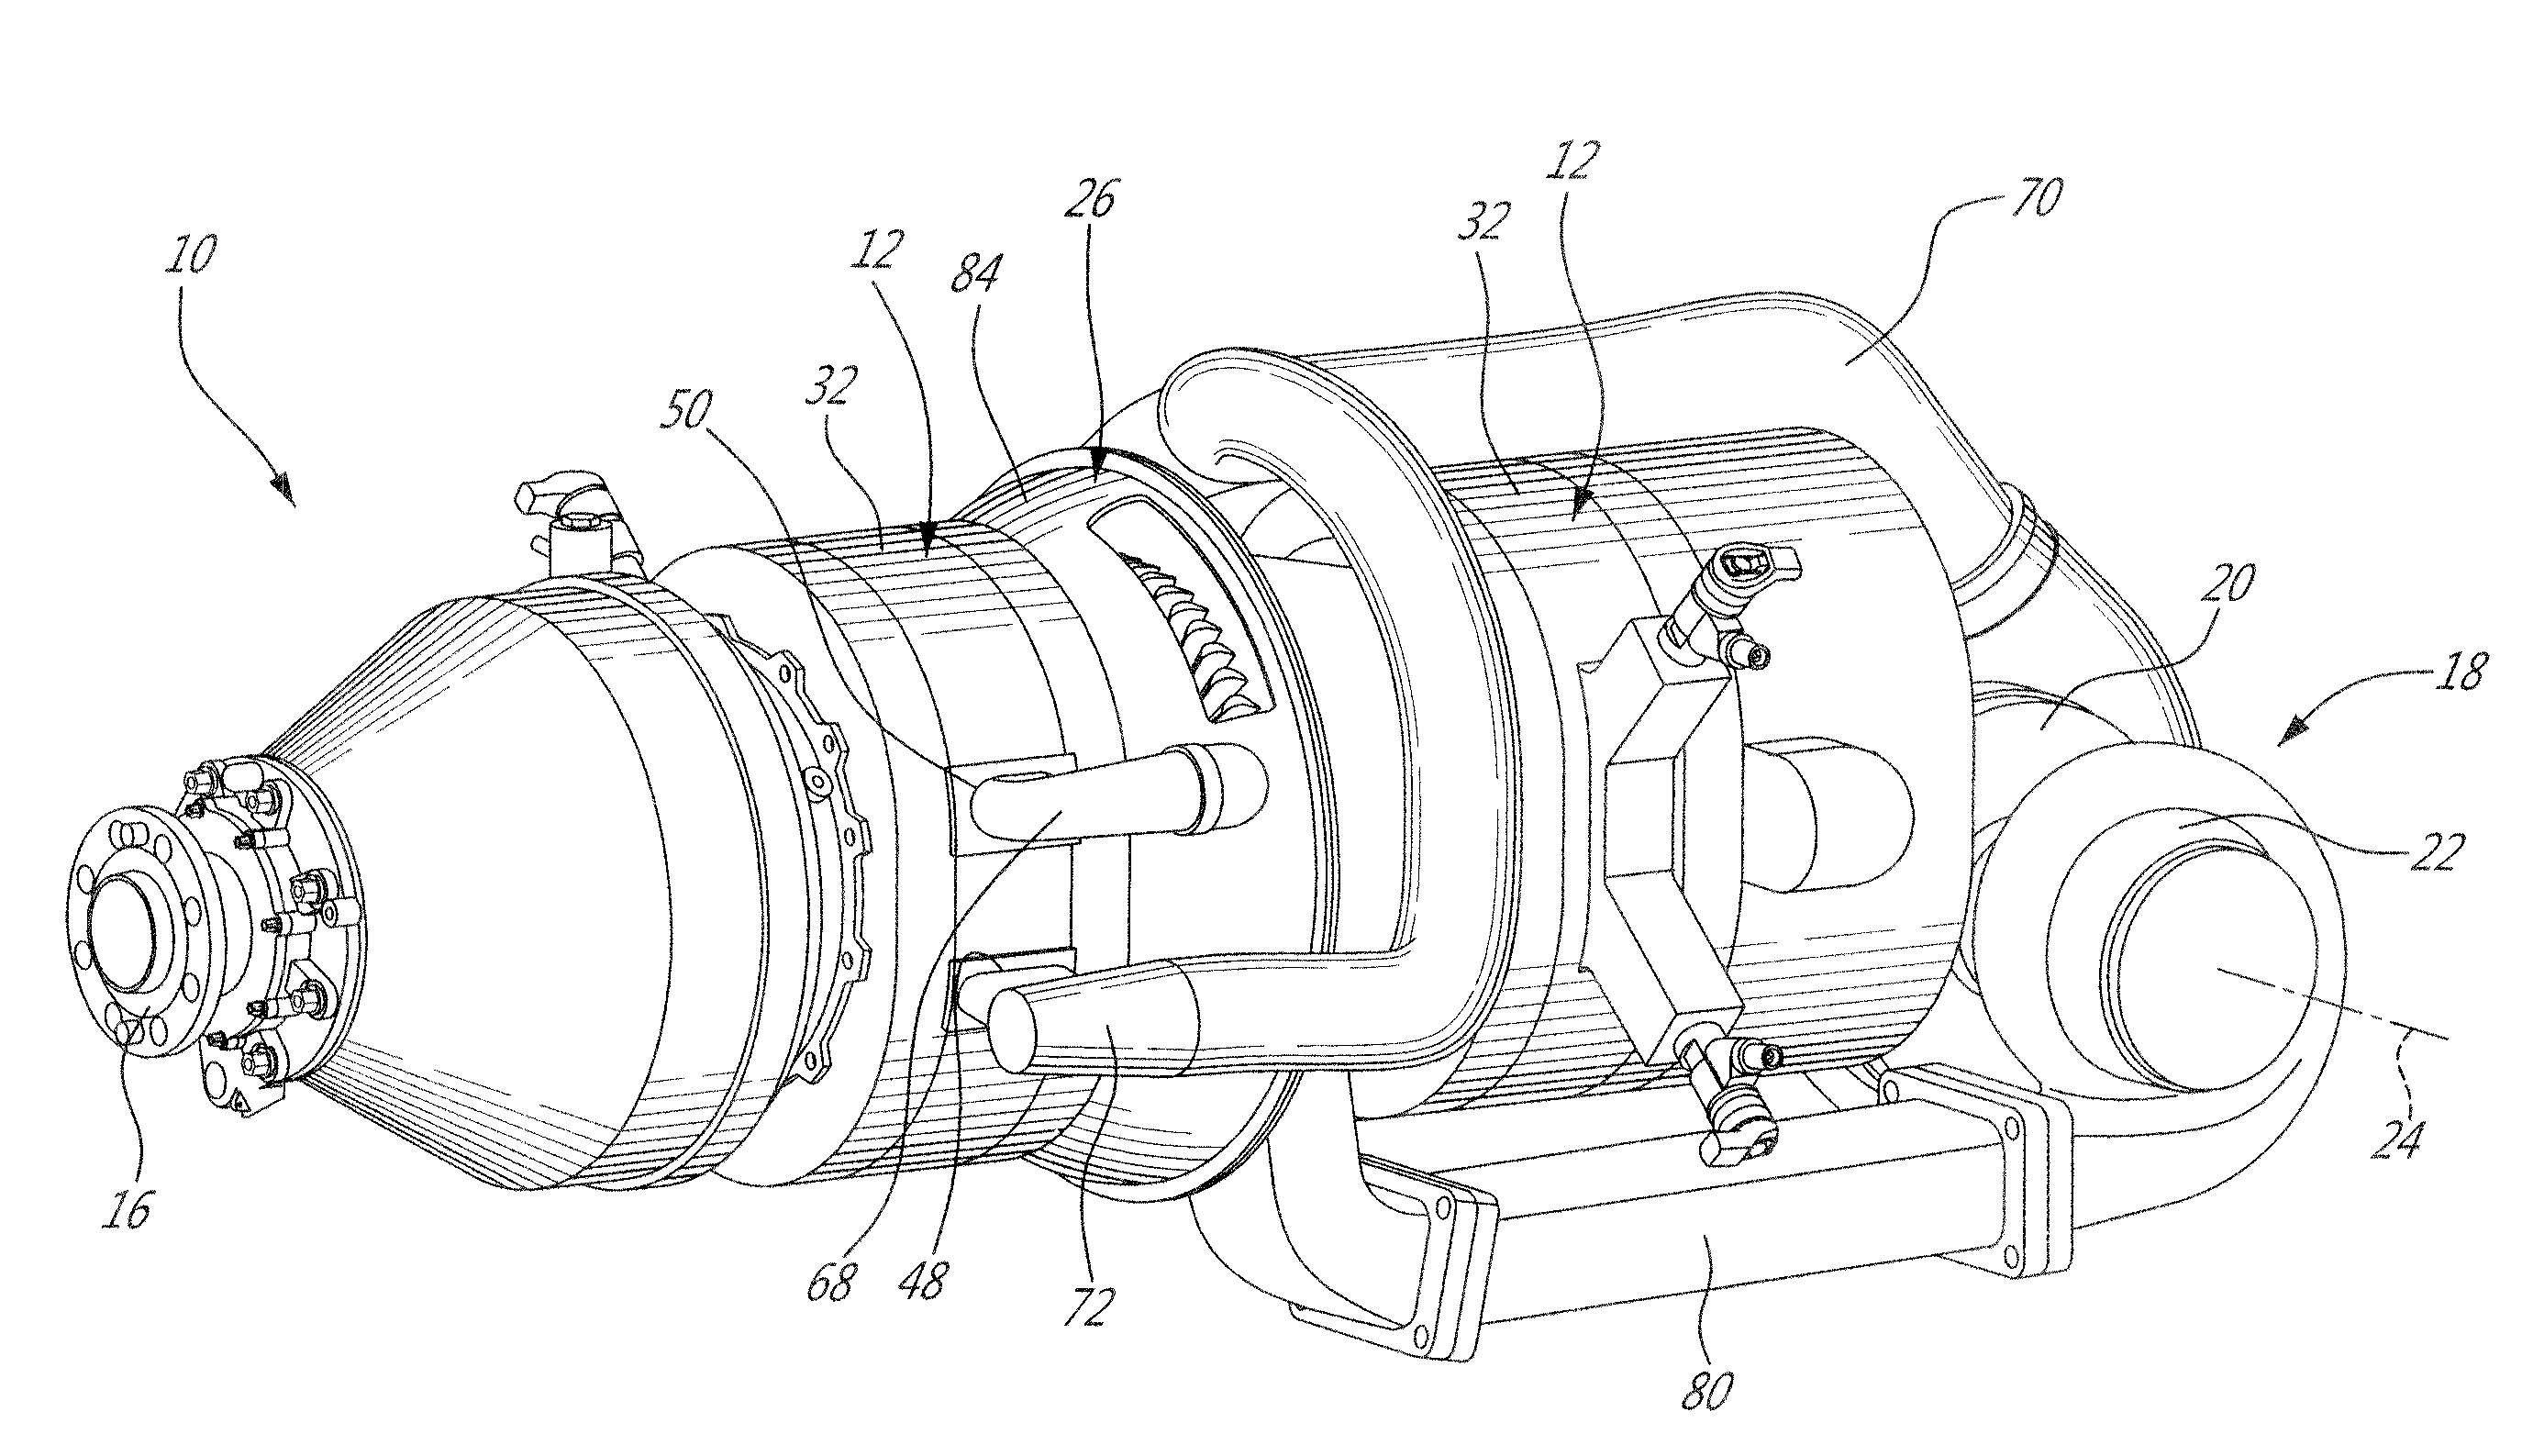 Compound cycle engine